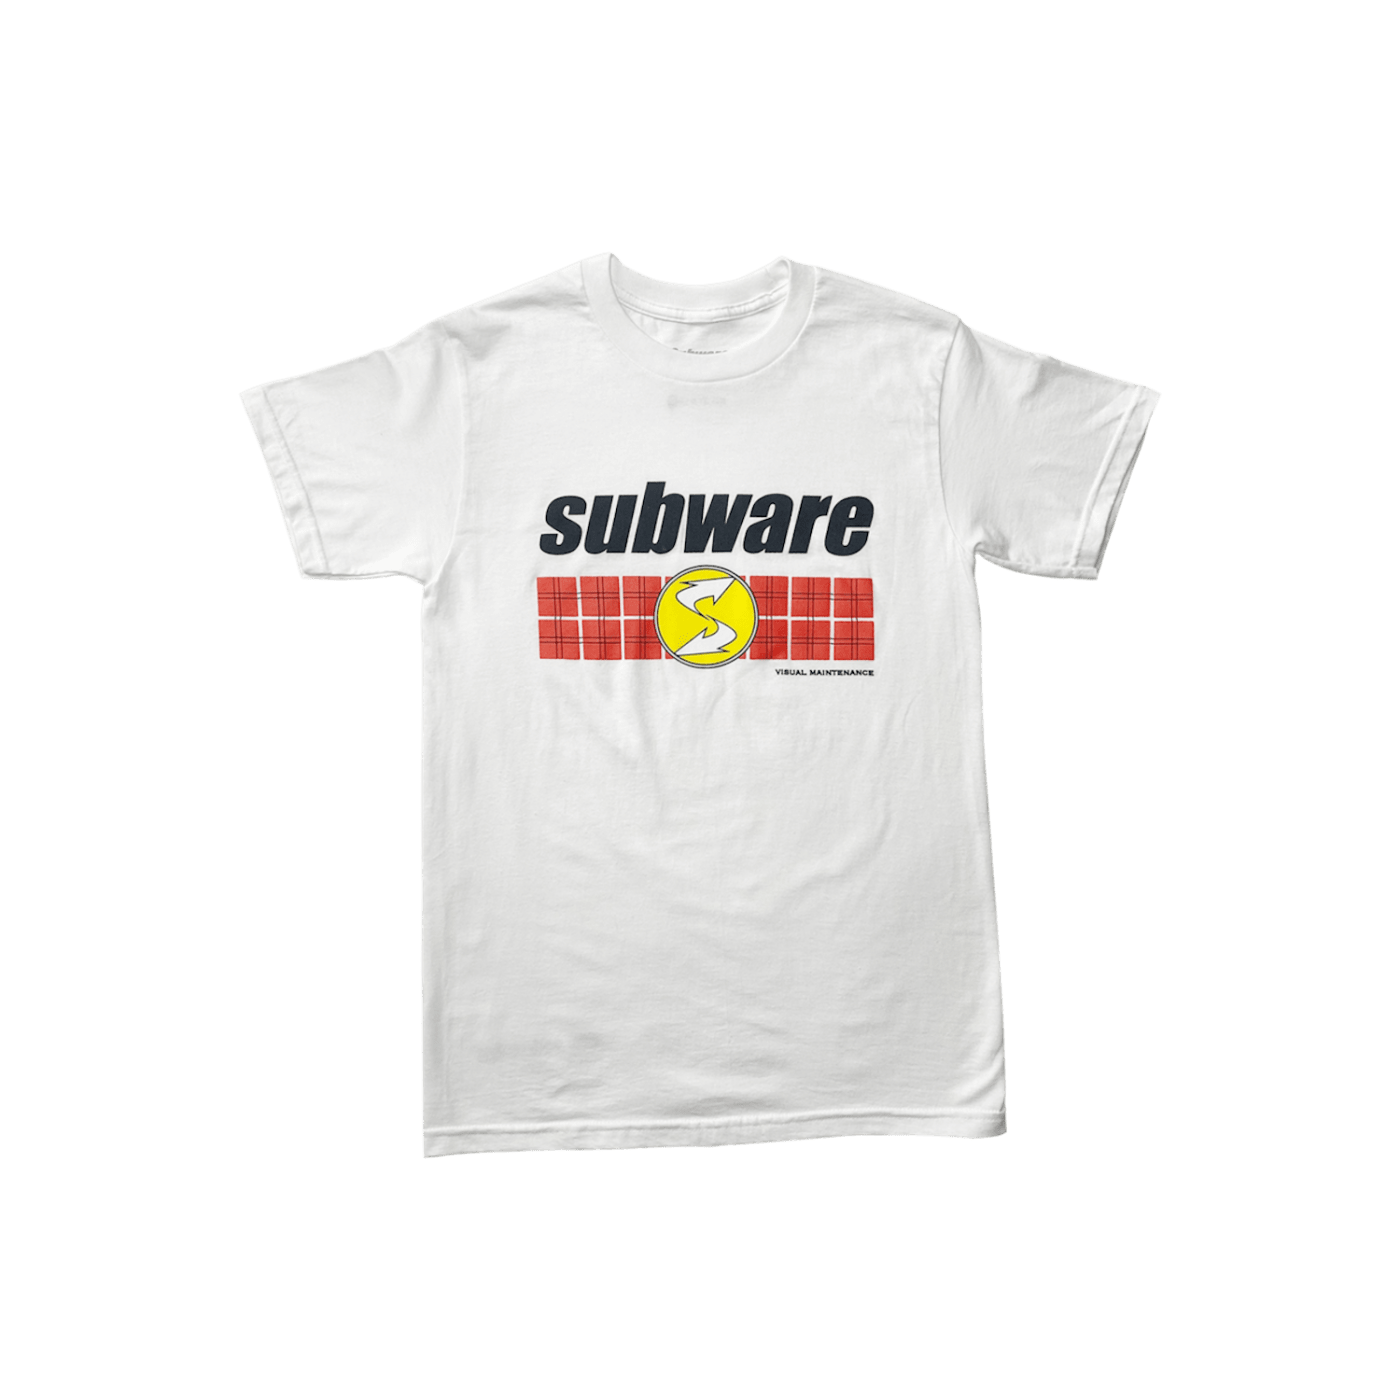 Stash on Subware Relaunch, NYC Streetwear & Supreme Collab | Complex